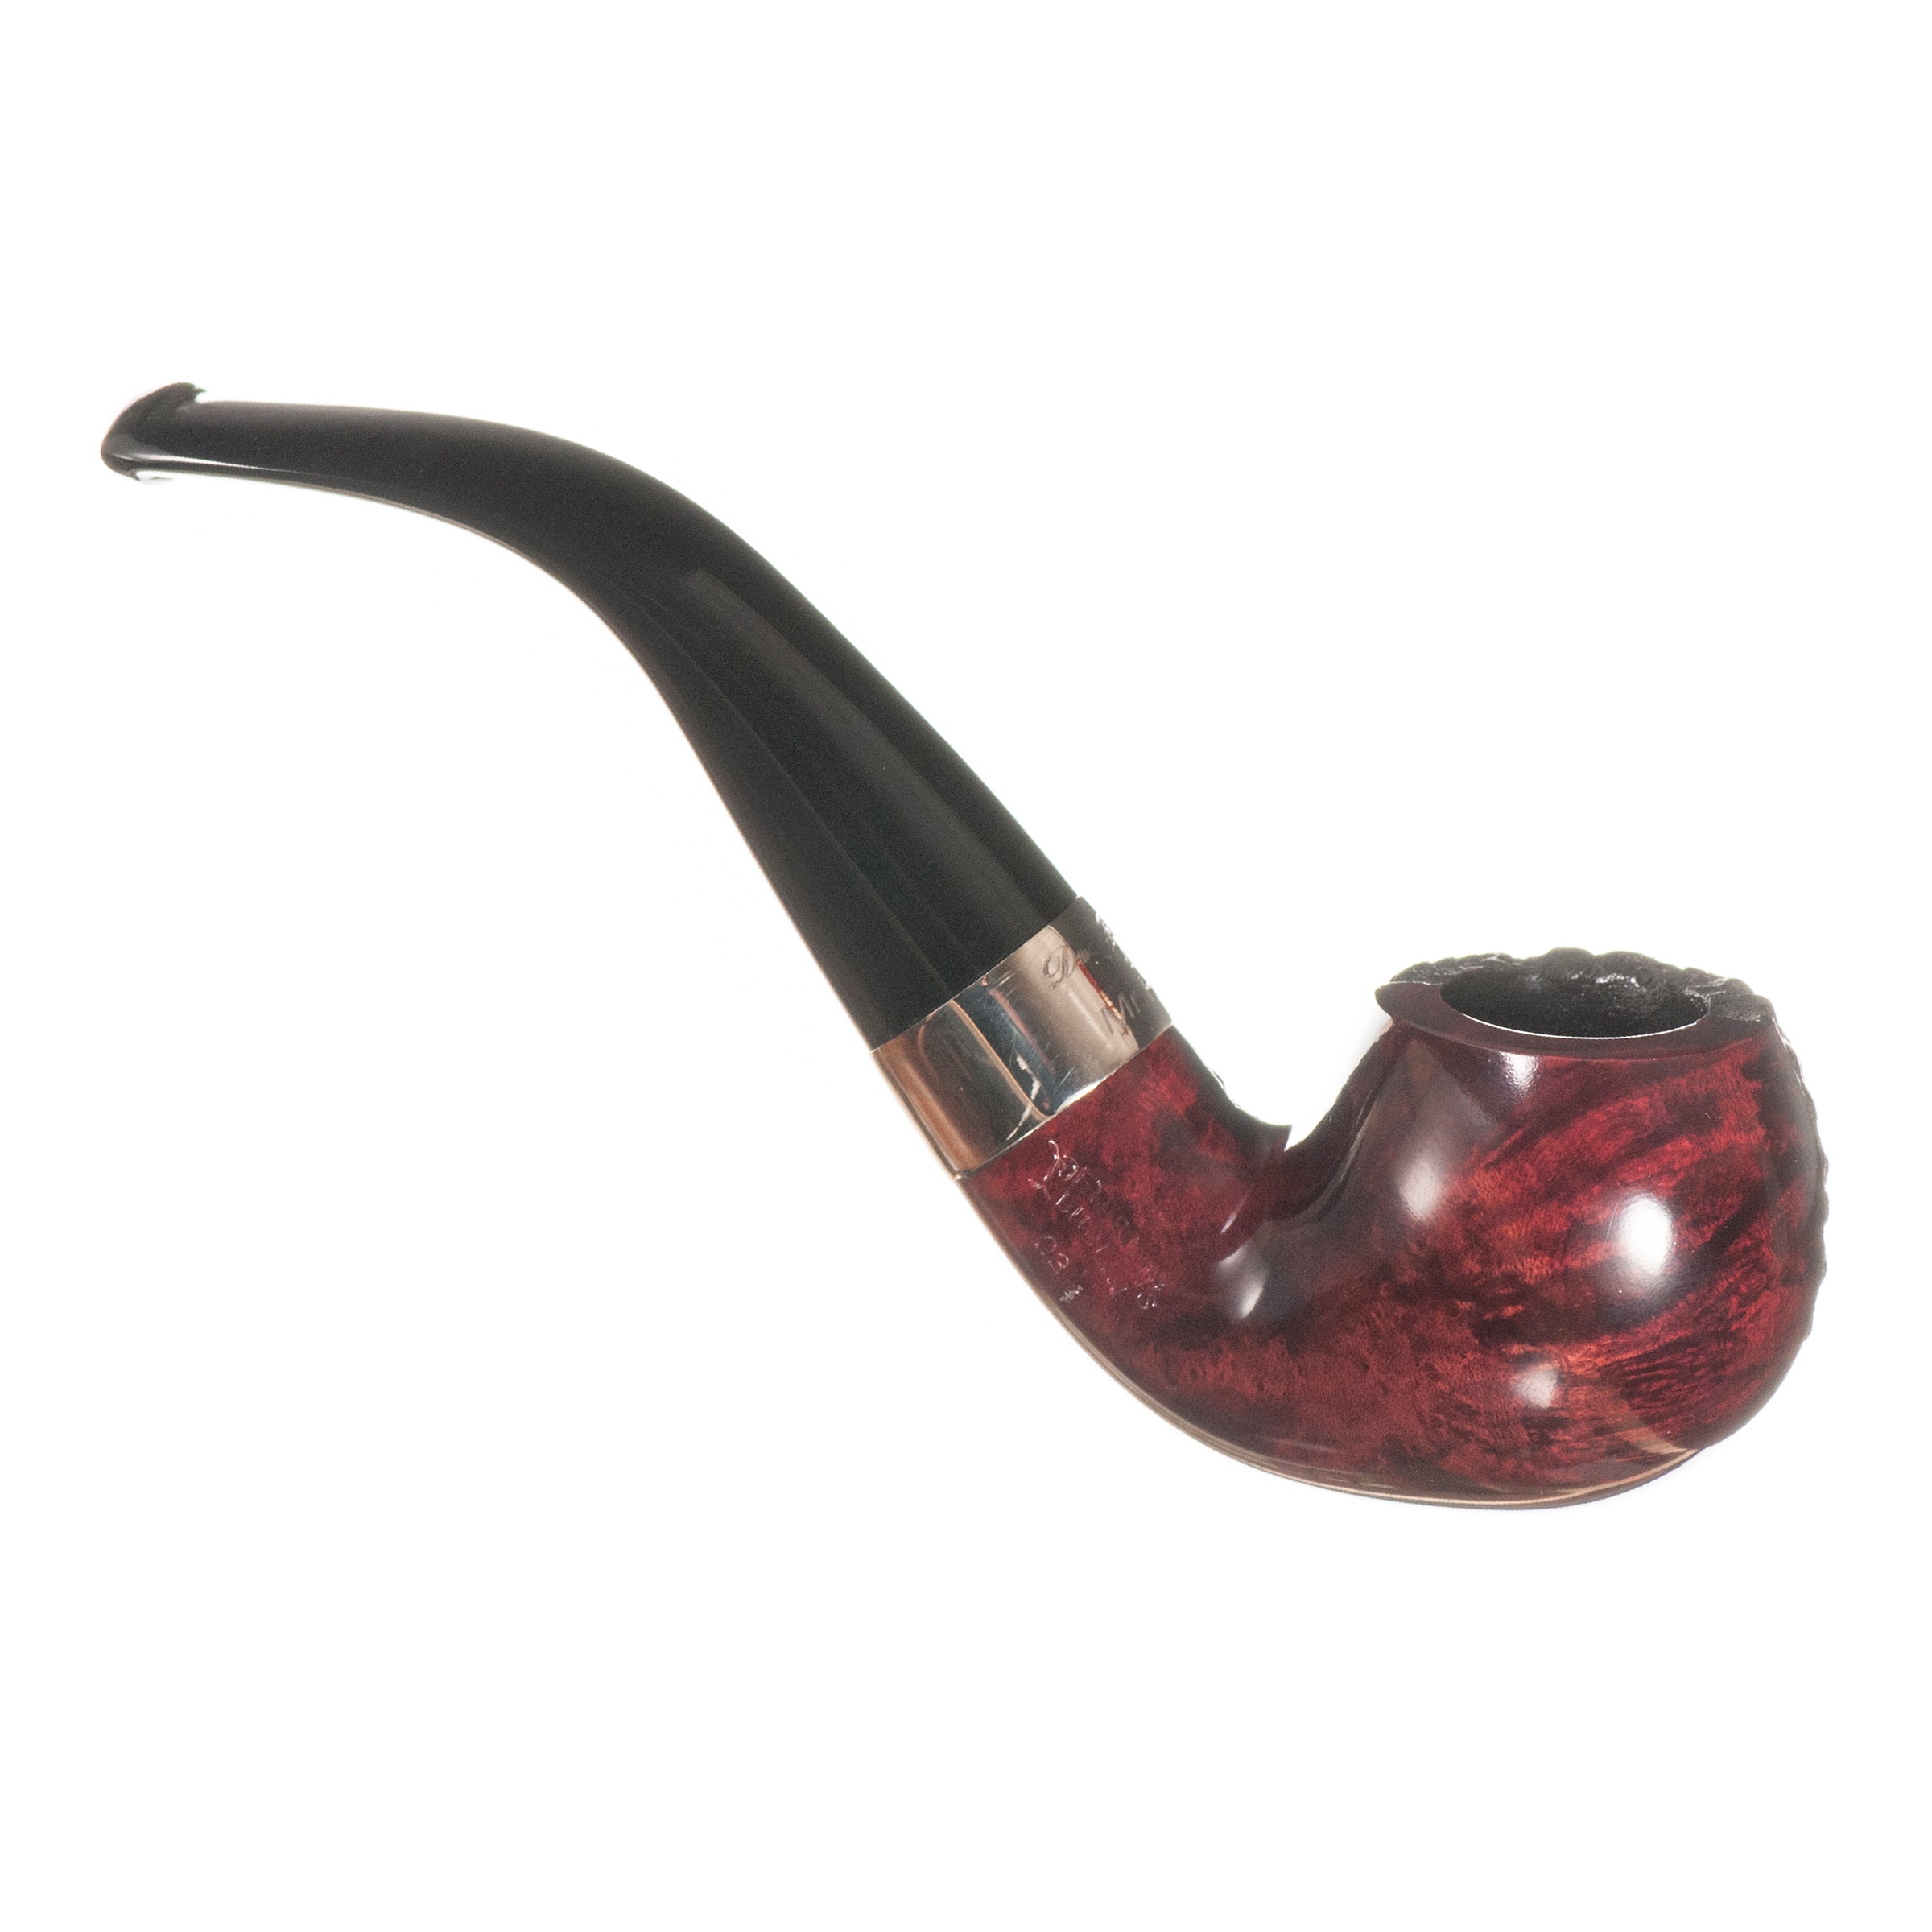 Peterson Jekyll & Hyde 03 Smooth/Rustic Pipe